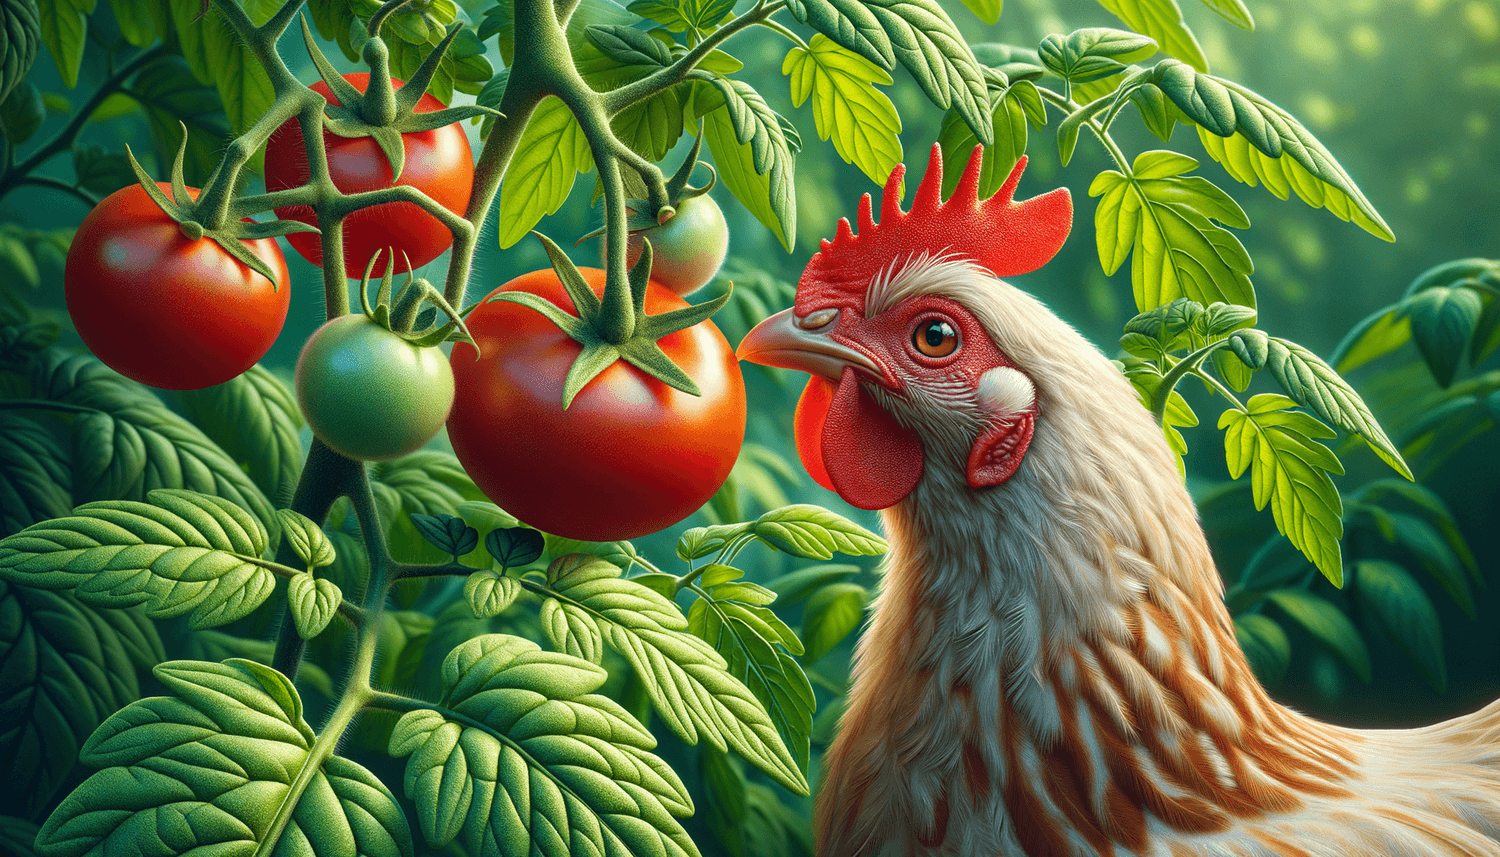 Can Chickens Eat Tomato Leaves?